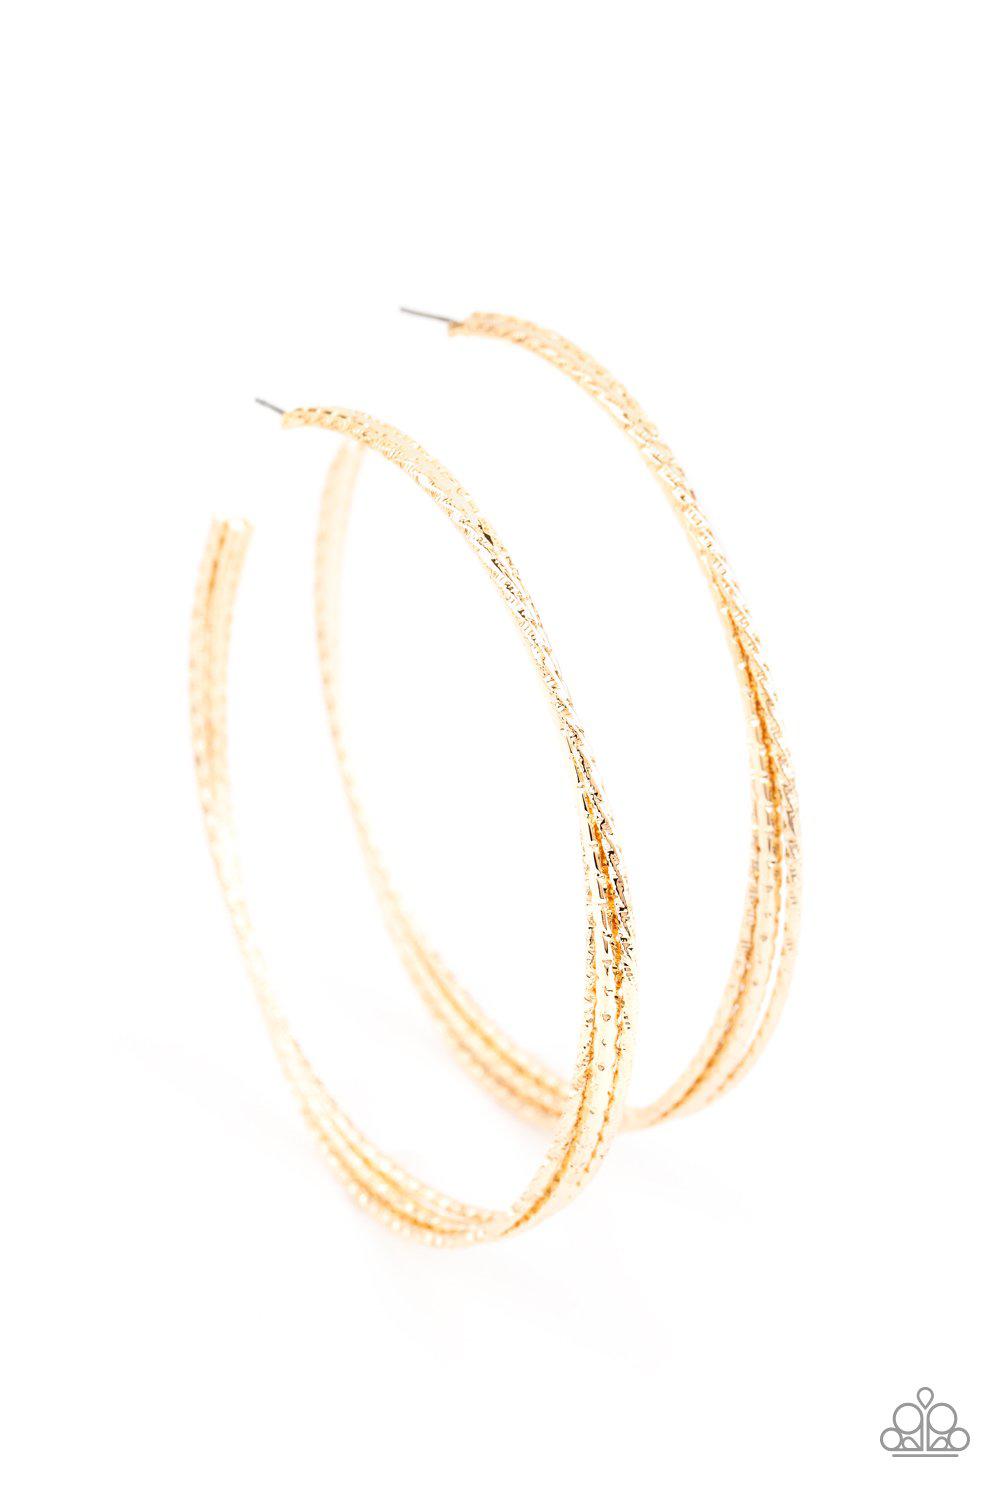 Watch and Learn Gold Hoop Earrings - Paparazzi Accessories - lightbox -CarasShop.com - $5 Jewelry by Cara Jewels